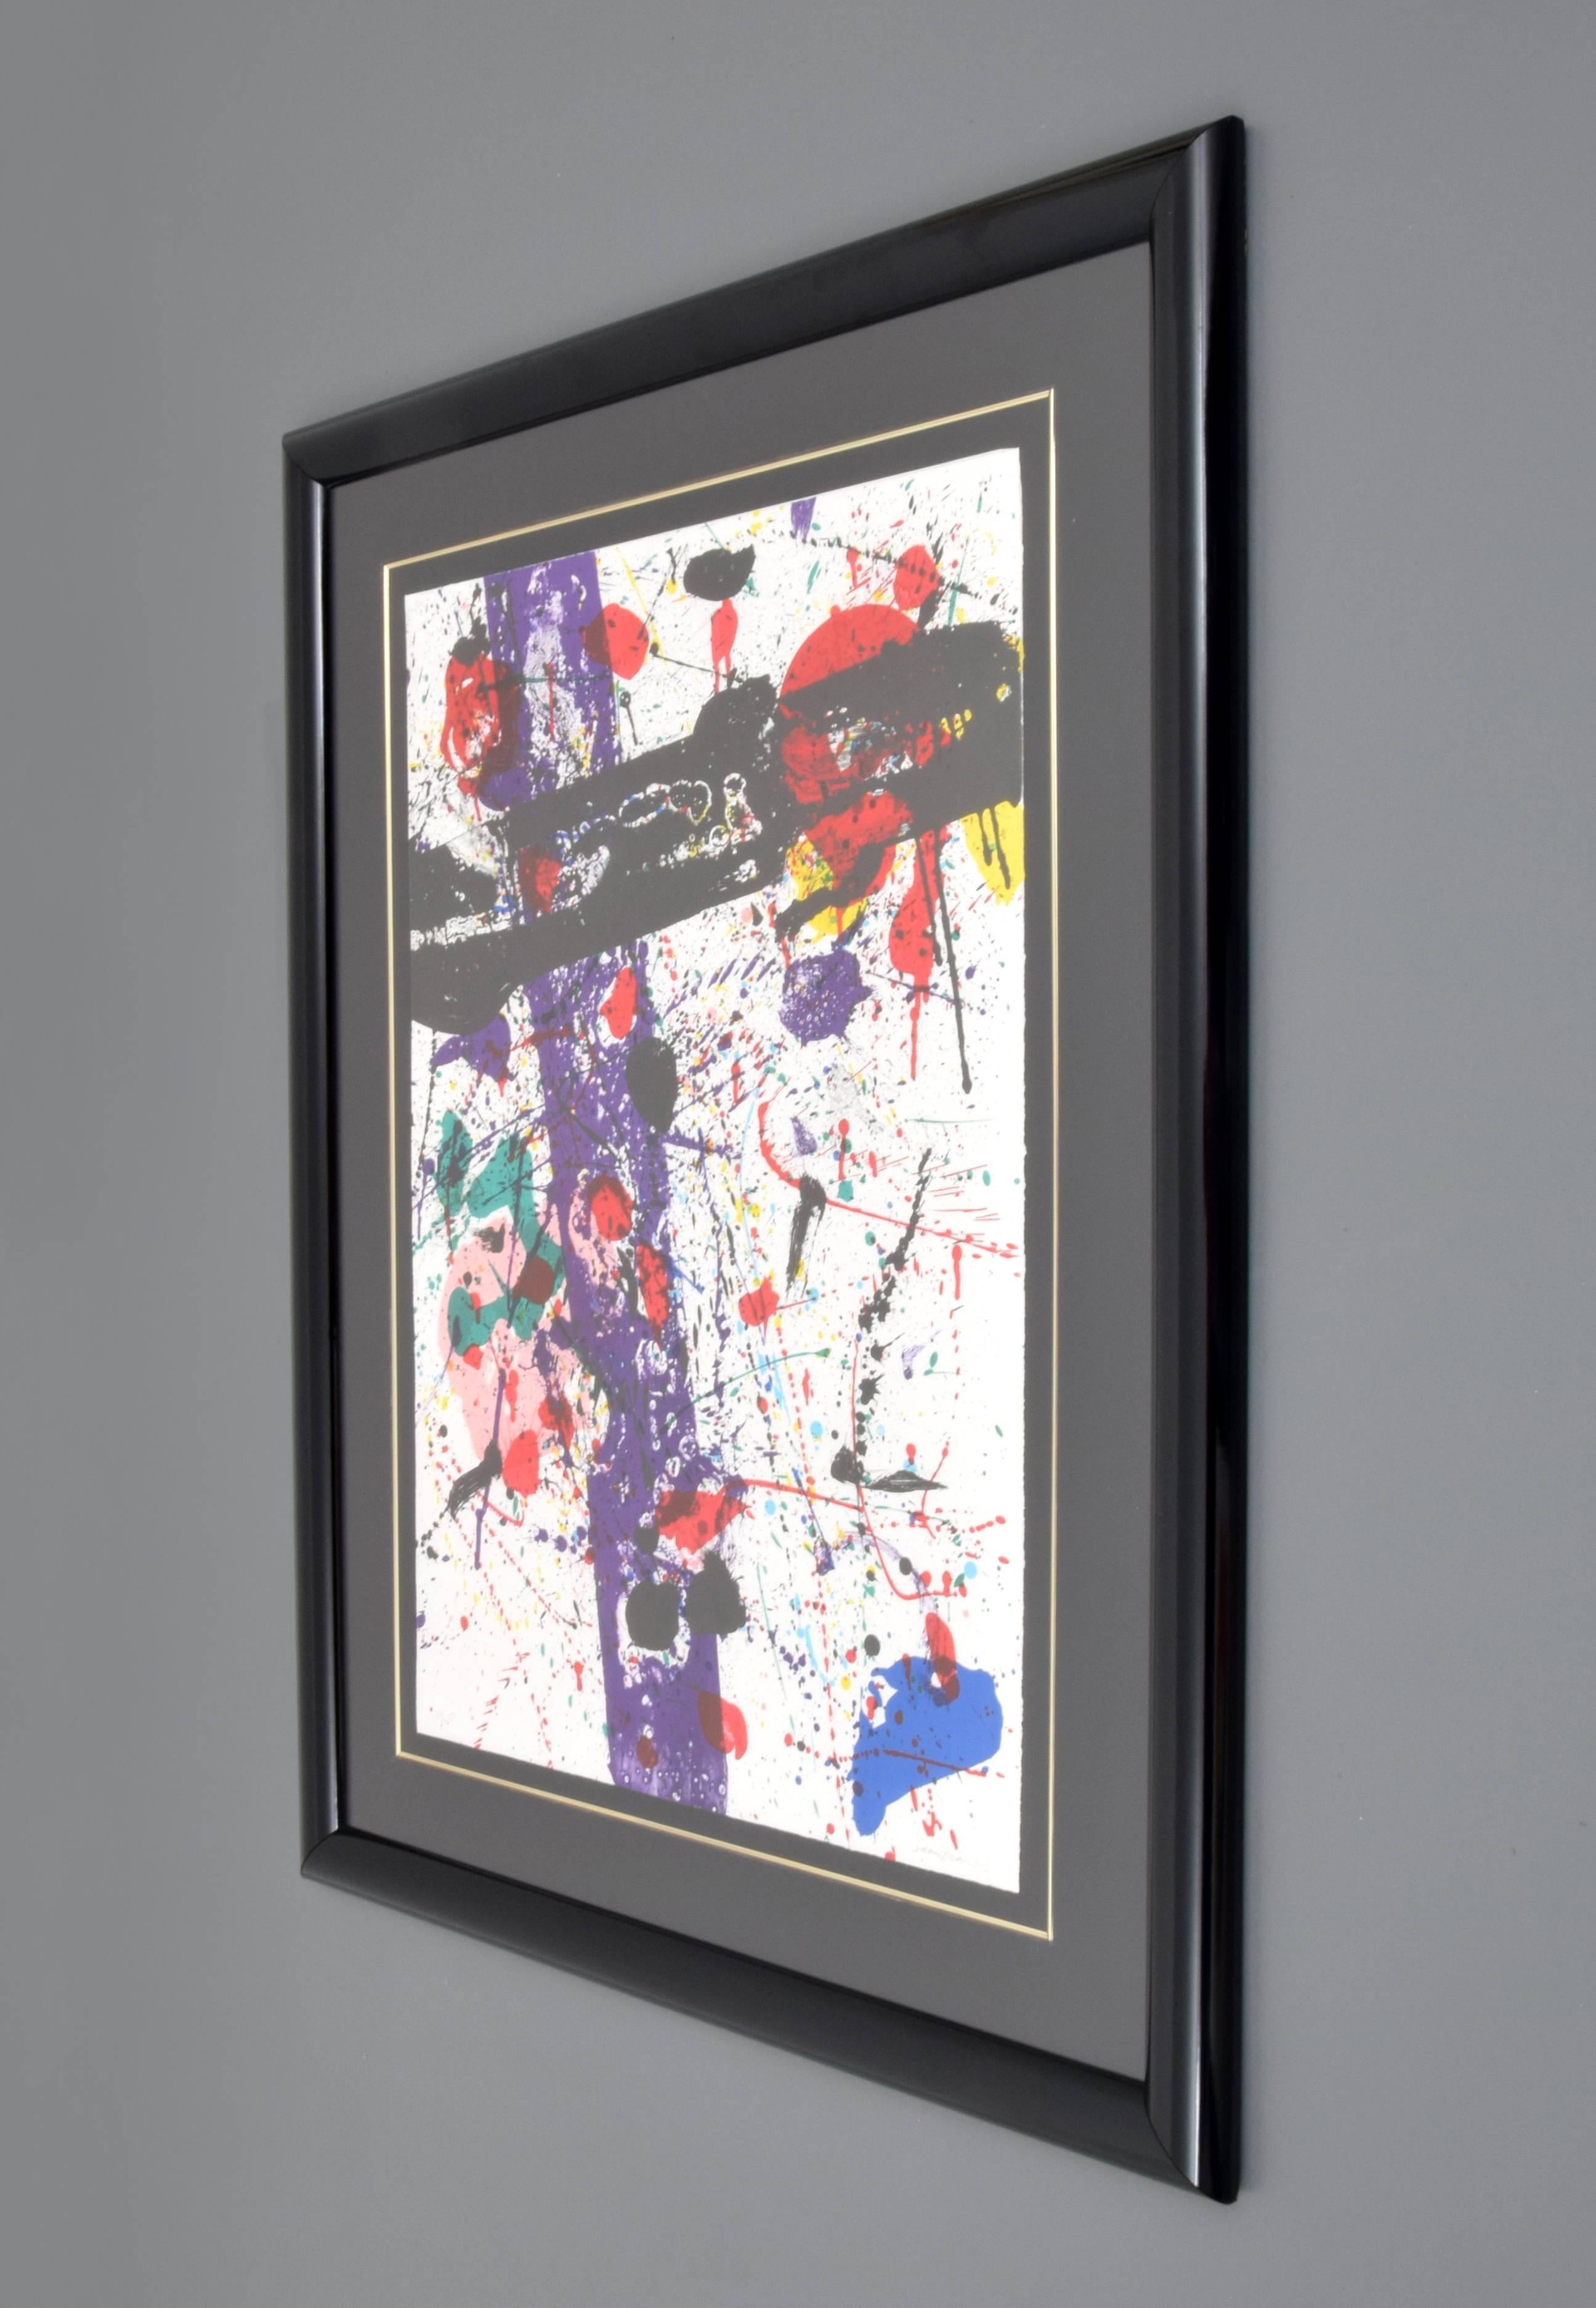 Lithograph by Sam Francis (1923-1994). Work was published by the Museum of Contemporary Art, Los Angeles and printed by George Page, the Litho Shop, Inc. Provenance: Fine Art World, Boca Raton, Florida Private Collection, Florida.

Markings: